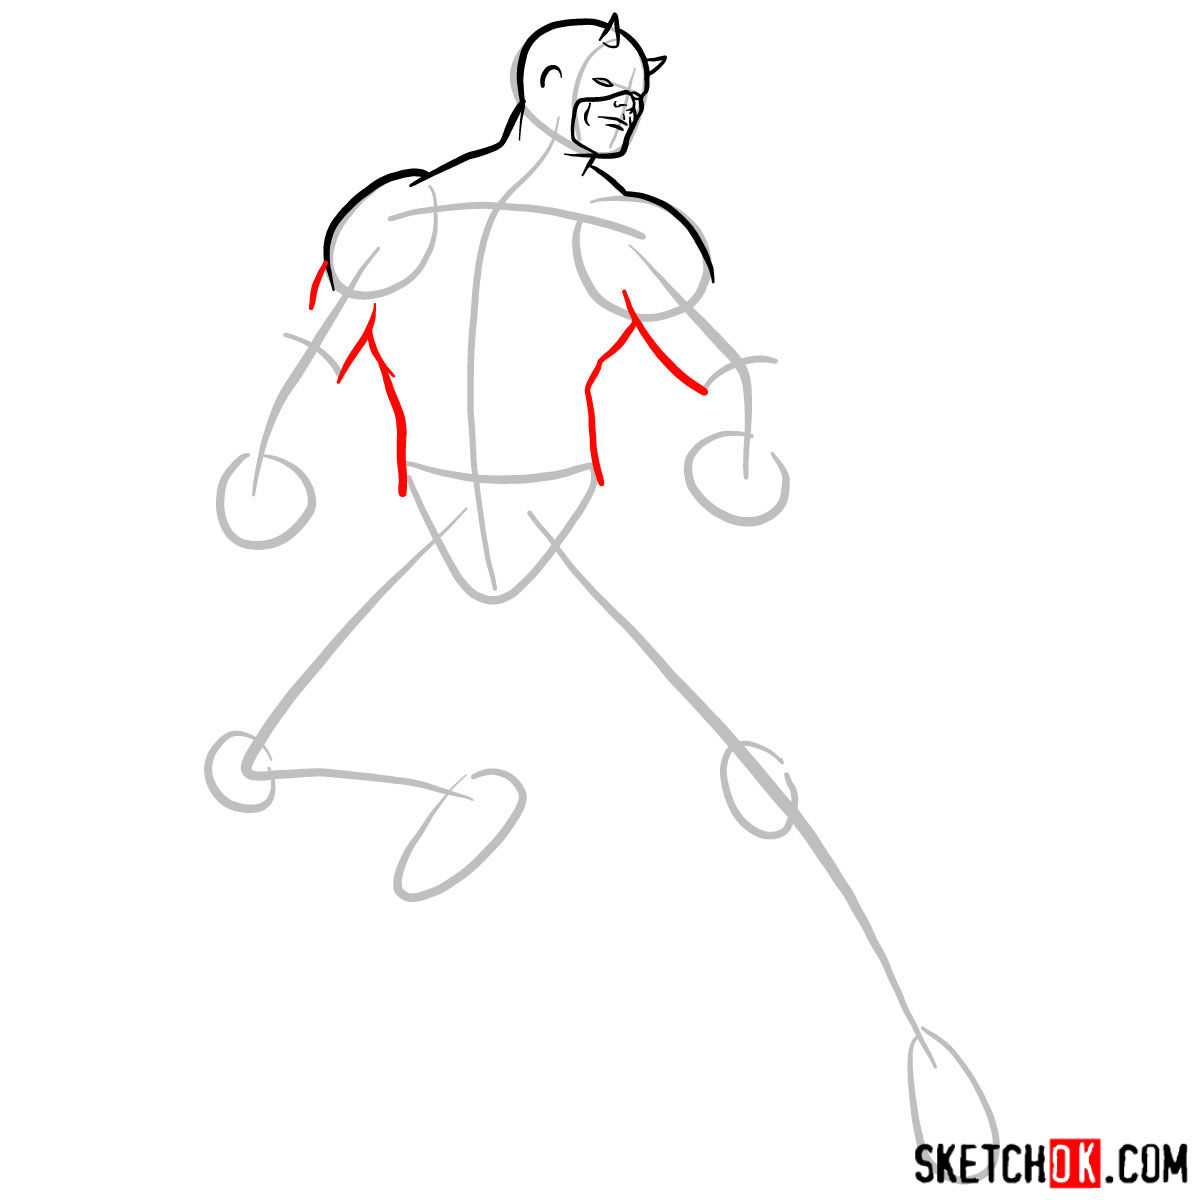 How to draw Daredevil from Marvel - step 05